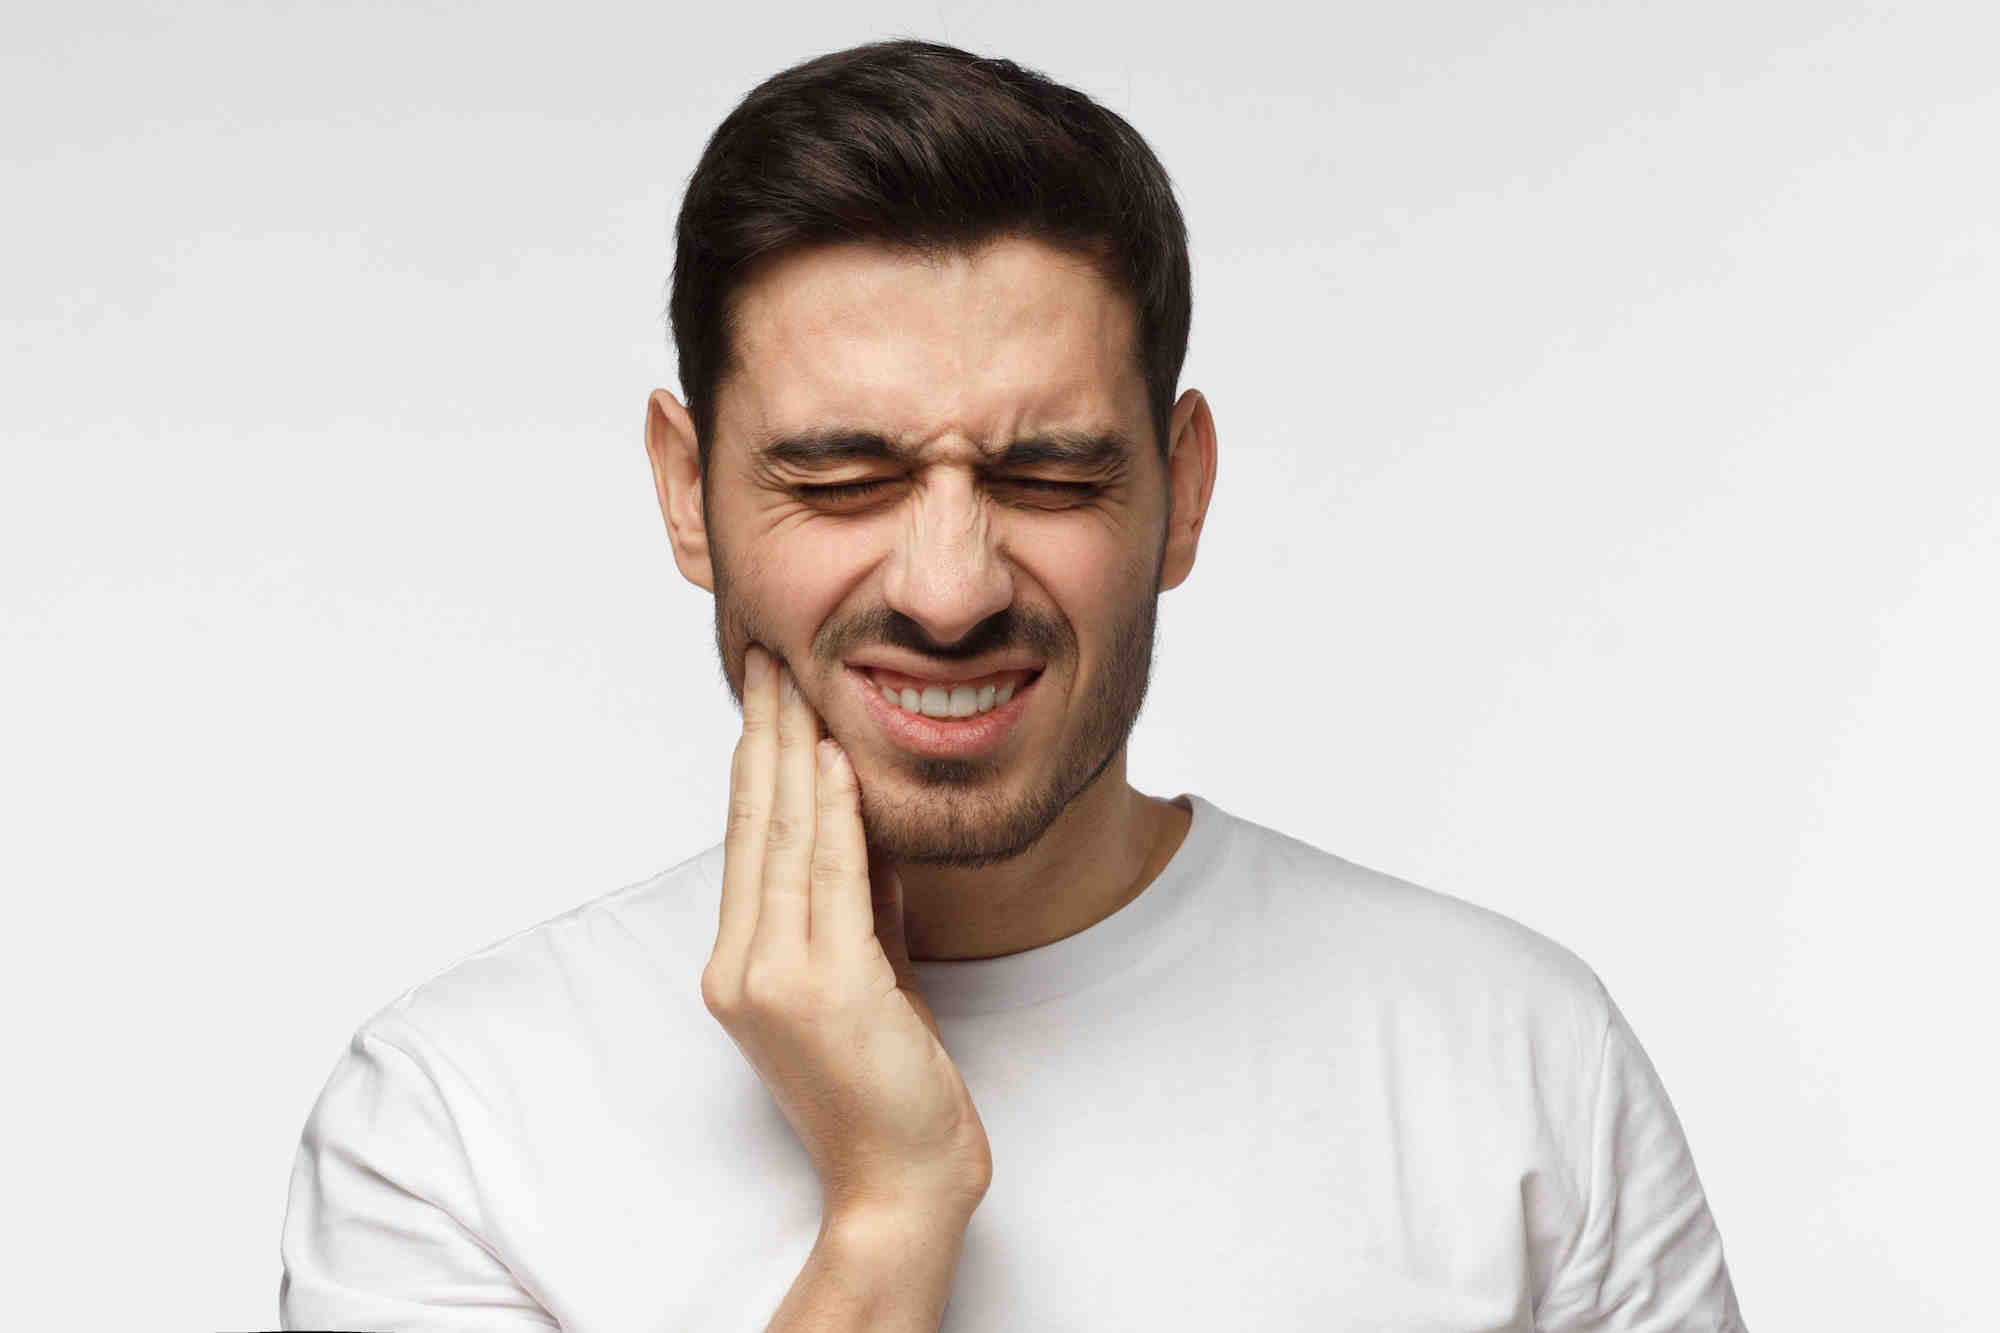 Is it better to get root canal or implant?